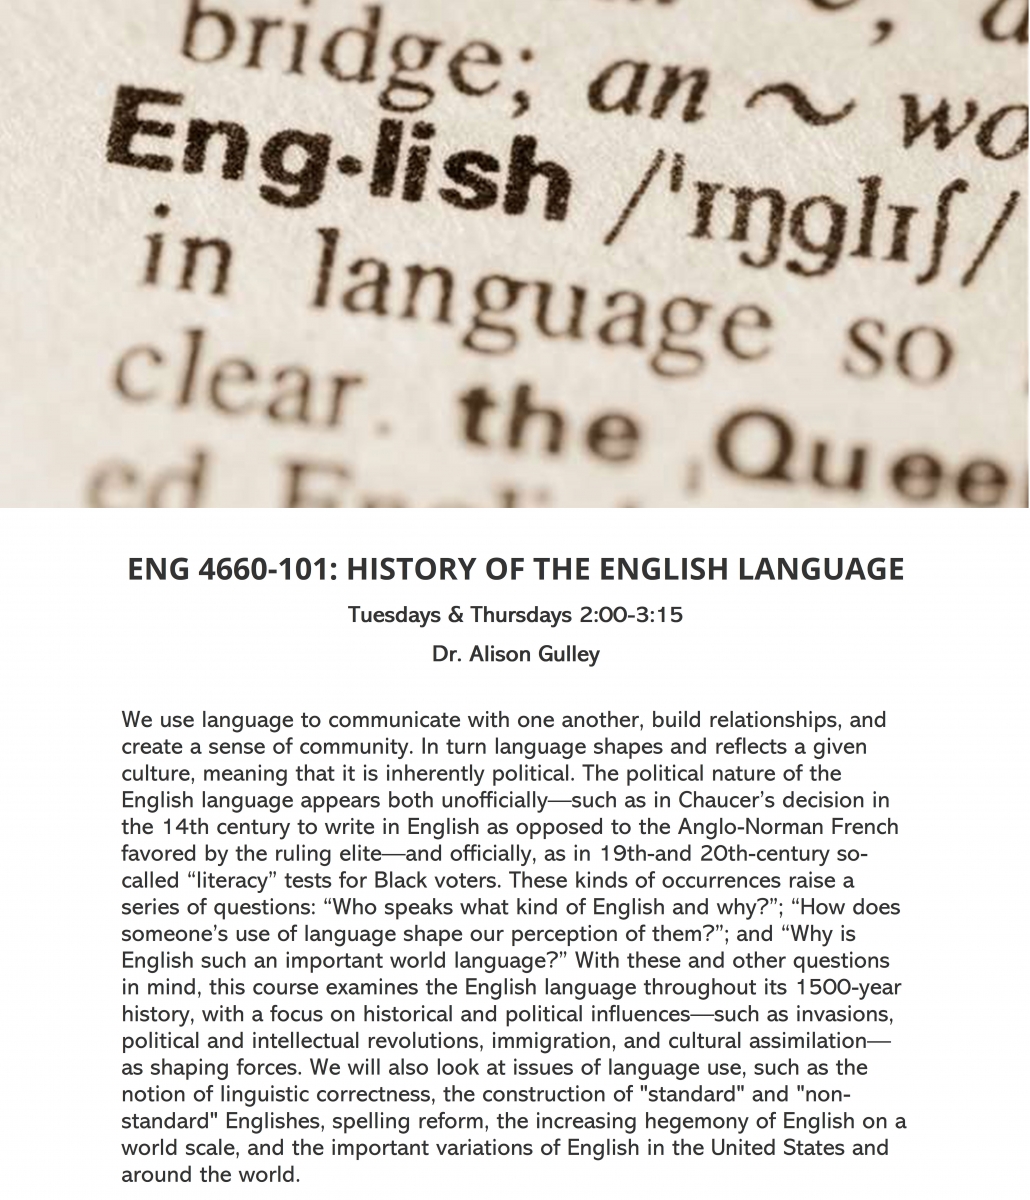 ENG 4660 with Dr Alison Gulley